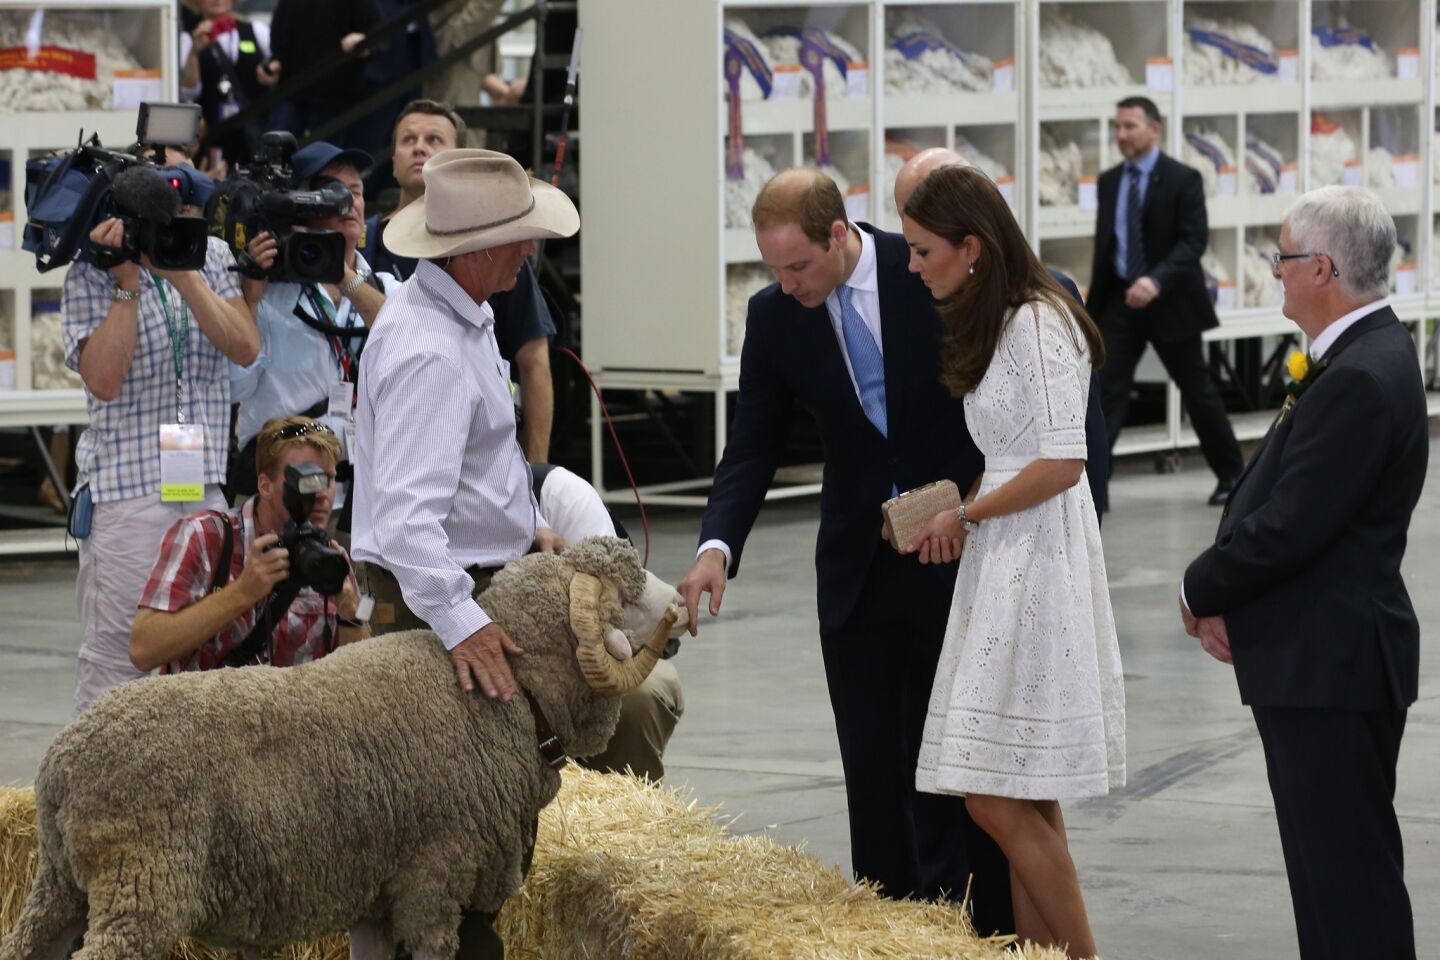 Prince William, center, and his wife, Kate, duchess of Cambridge, are introduced to Fred the Ram during a tour of a sheep and wool exhibition at the Sydney Easter Show.